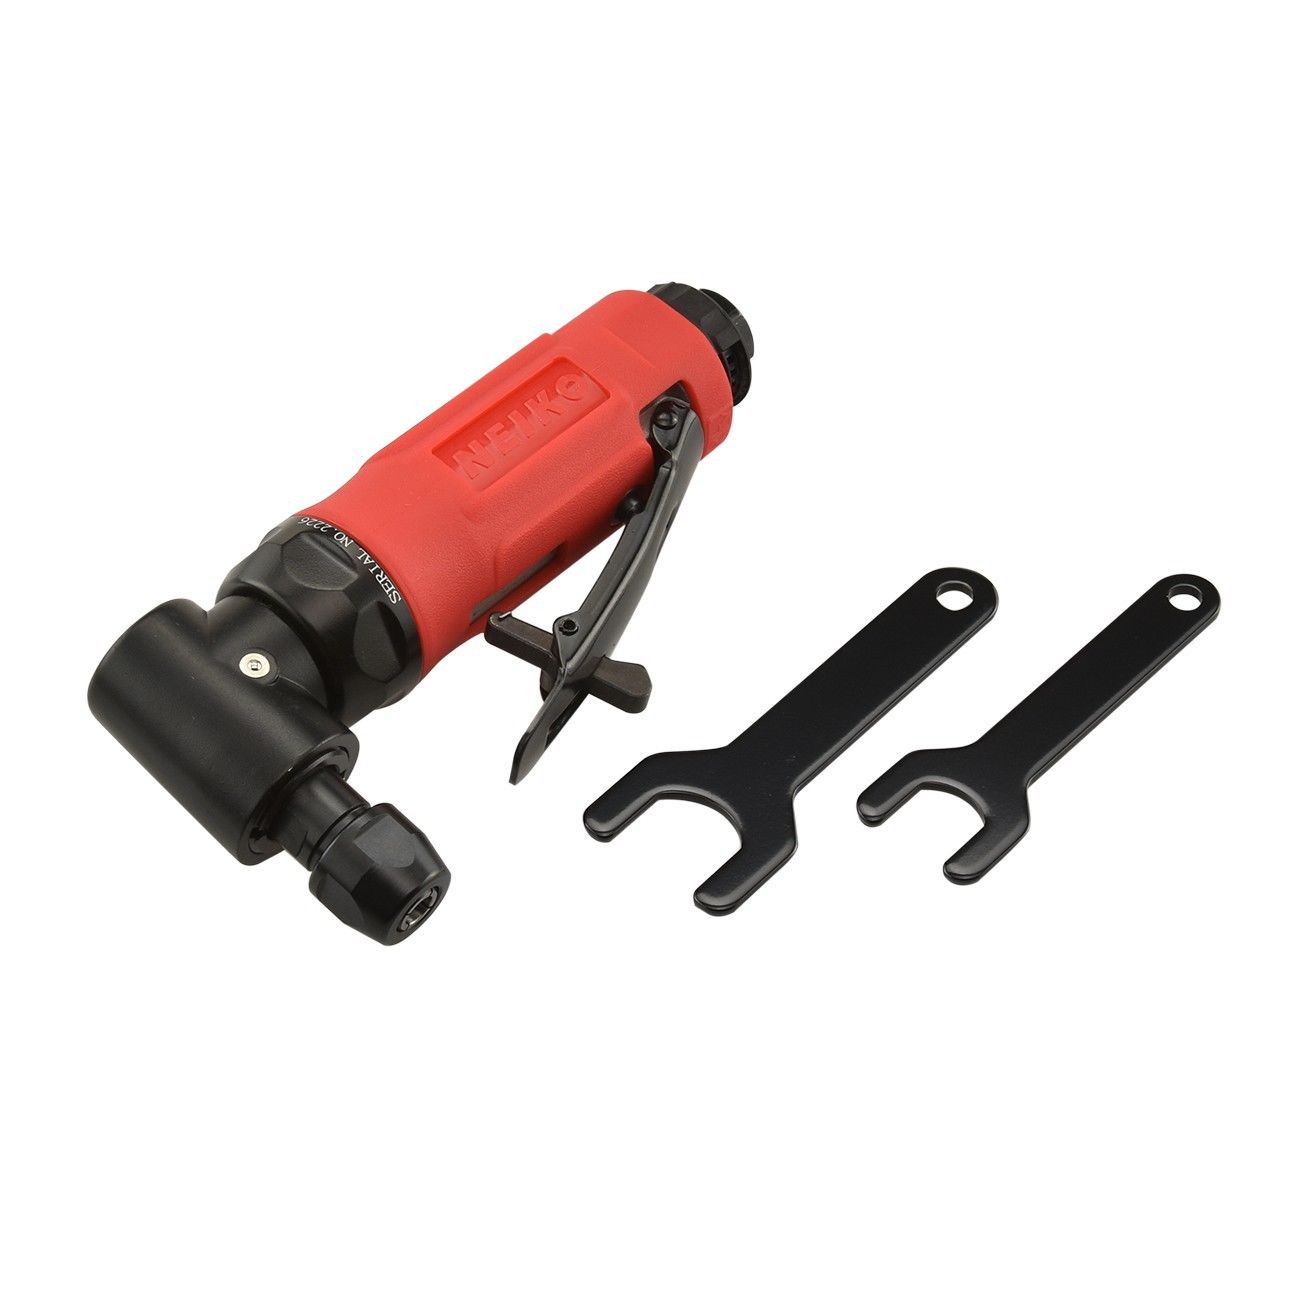 WORKPRO Air Angle Die Grinder 1/4-In Pneumatic Right Angle, 55% OFF